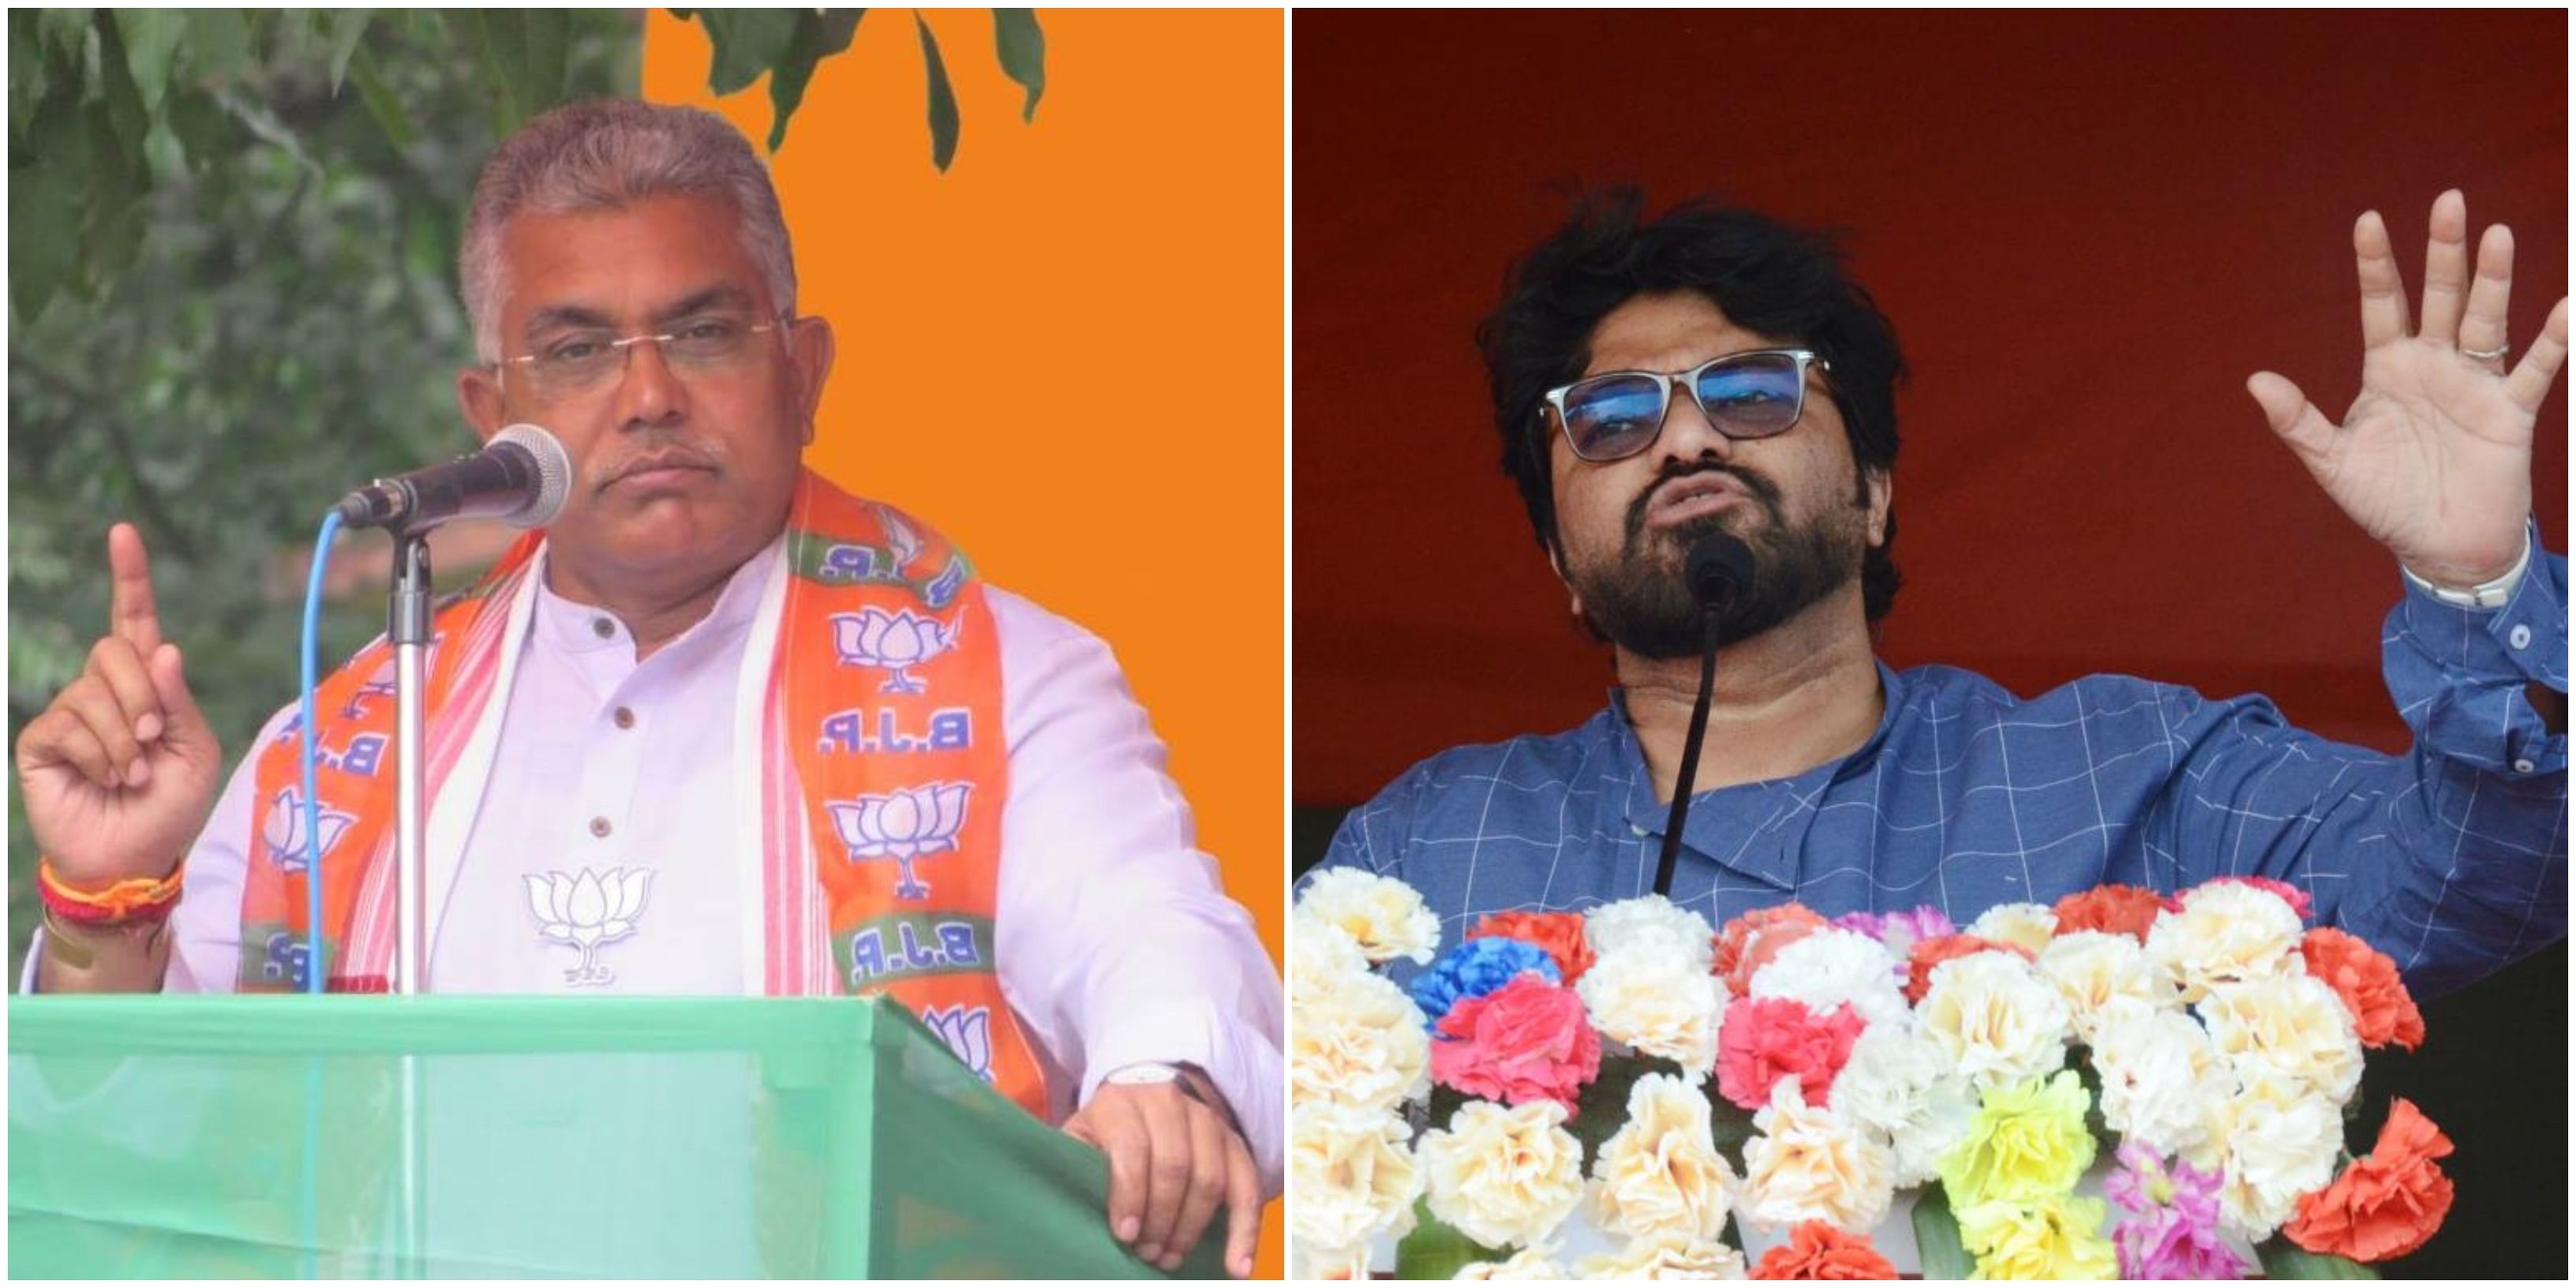 Bengal BJP leaders Dilip Ghosh (R) and Babul Supriyo (L); BJP wants to give the impression that some in the Bengal unit of the party are 'cultured', others 'uncultured' and they are fighting for dominance. (Photo credit: Twitter/AFP)